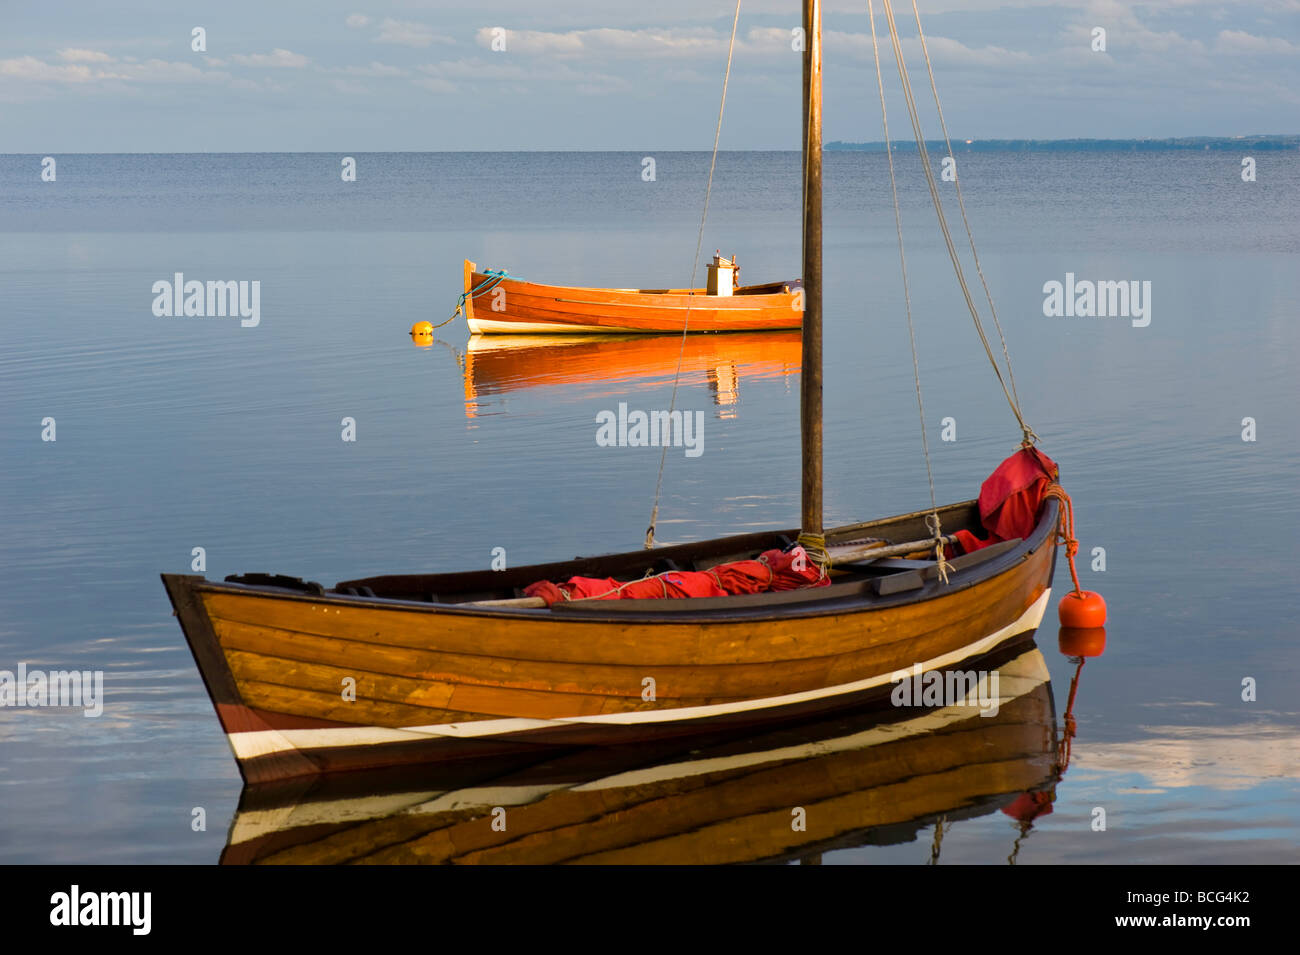 Boat moored in Puck Bay early evening Hel Peninsula Baltic Sea Poland Stock Photo